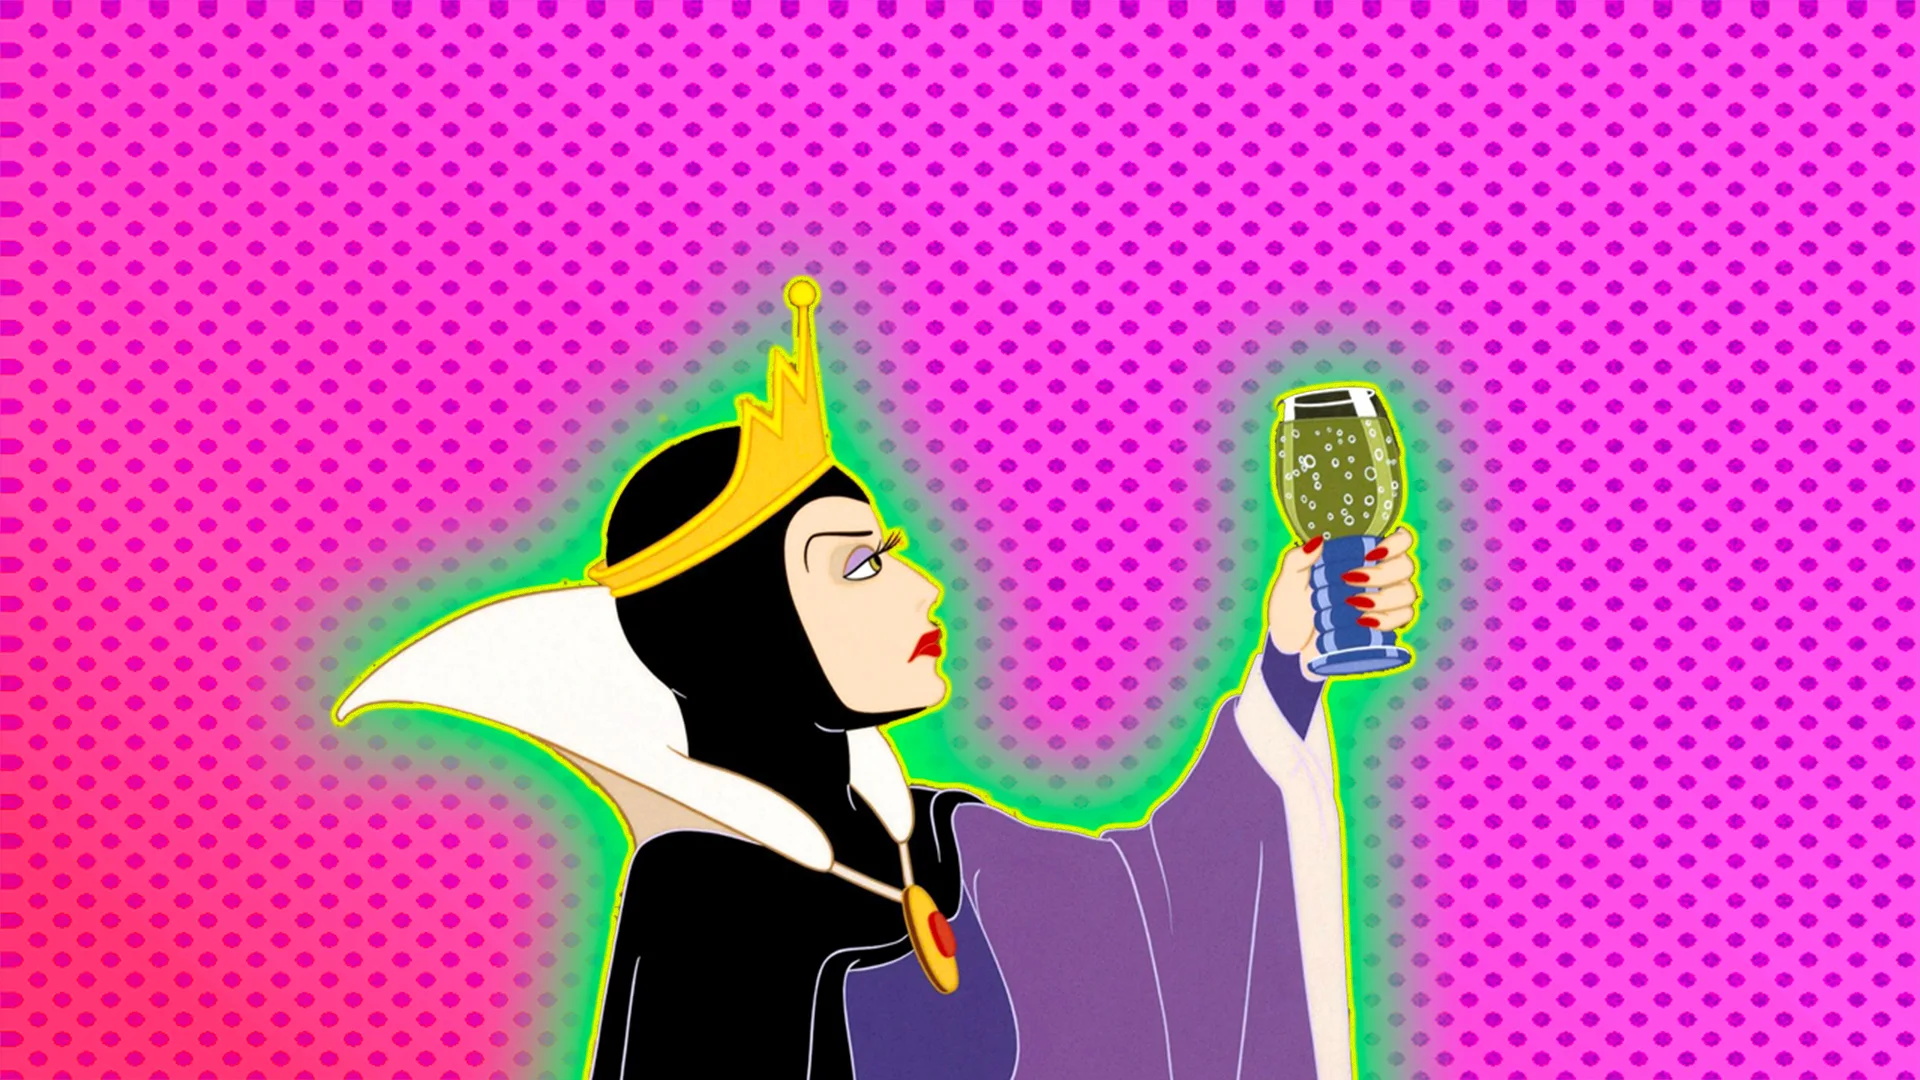 The Wicked Queen from Snow White holds up a drink above head. She has a green glow around her on a pink spotty background